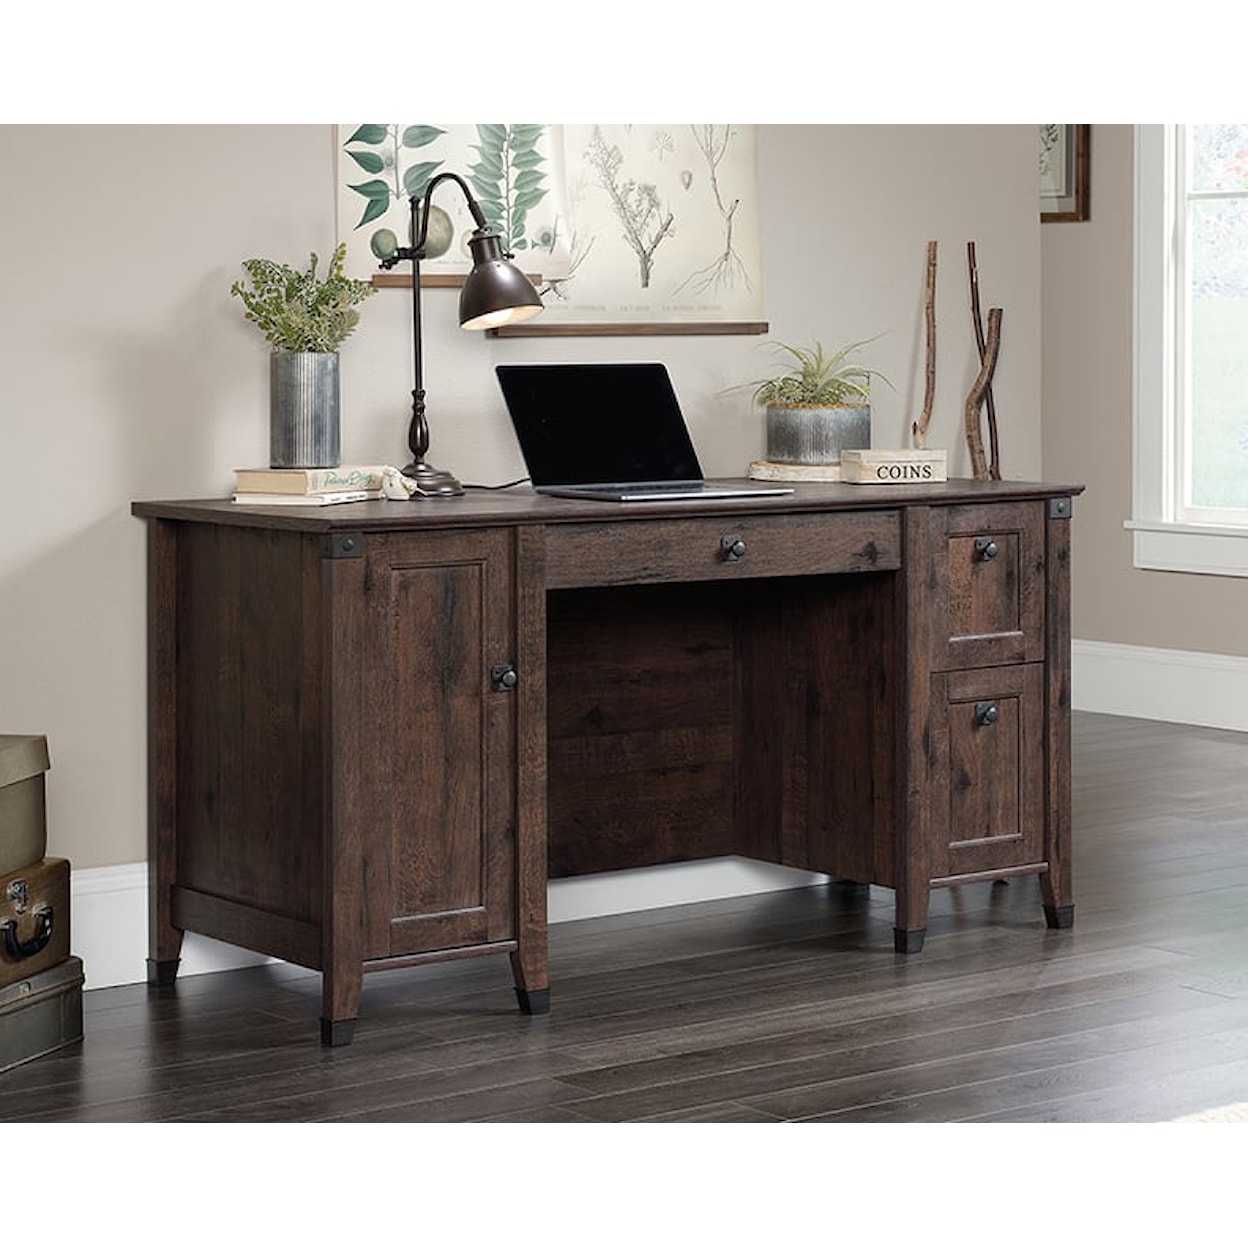 Sauder Carson Forge Computer Desk with File Drawer